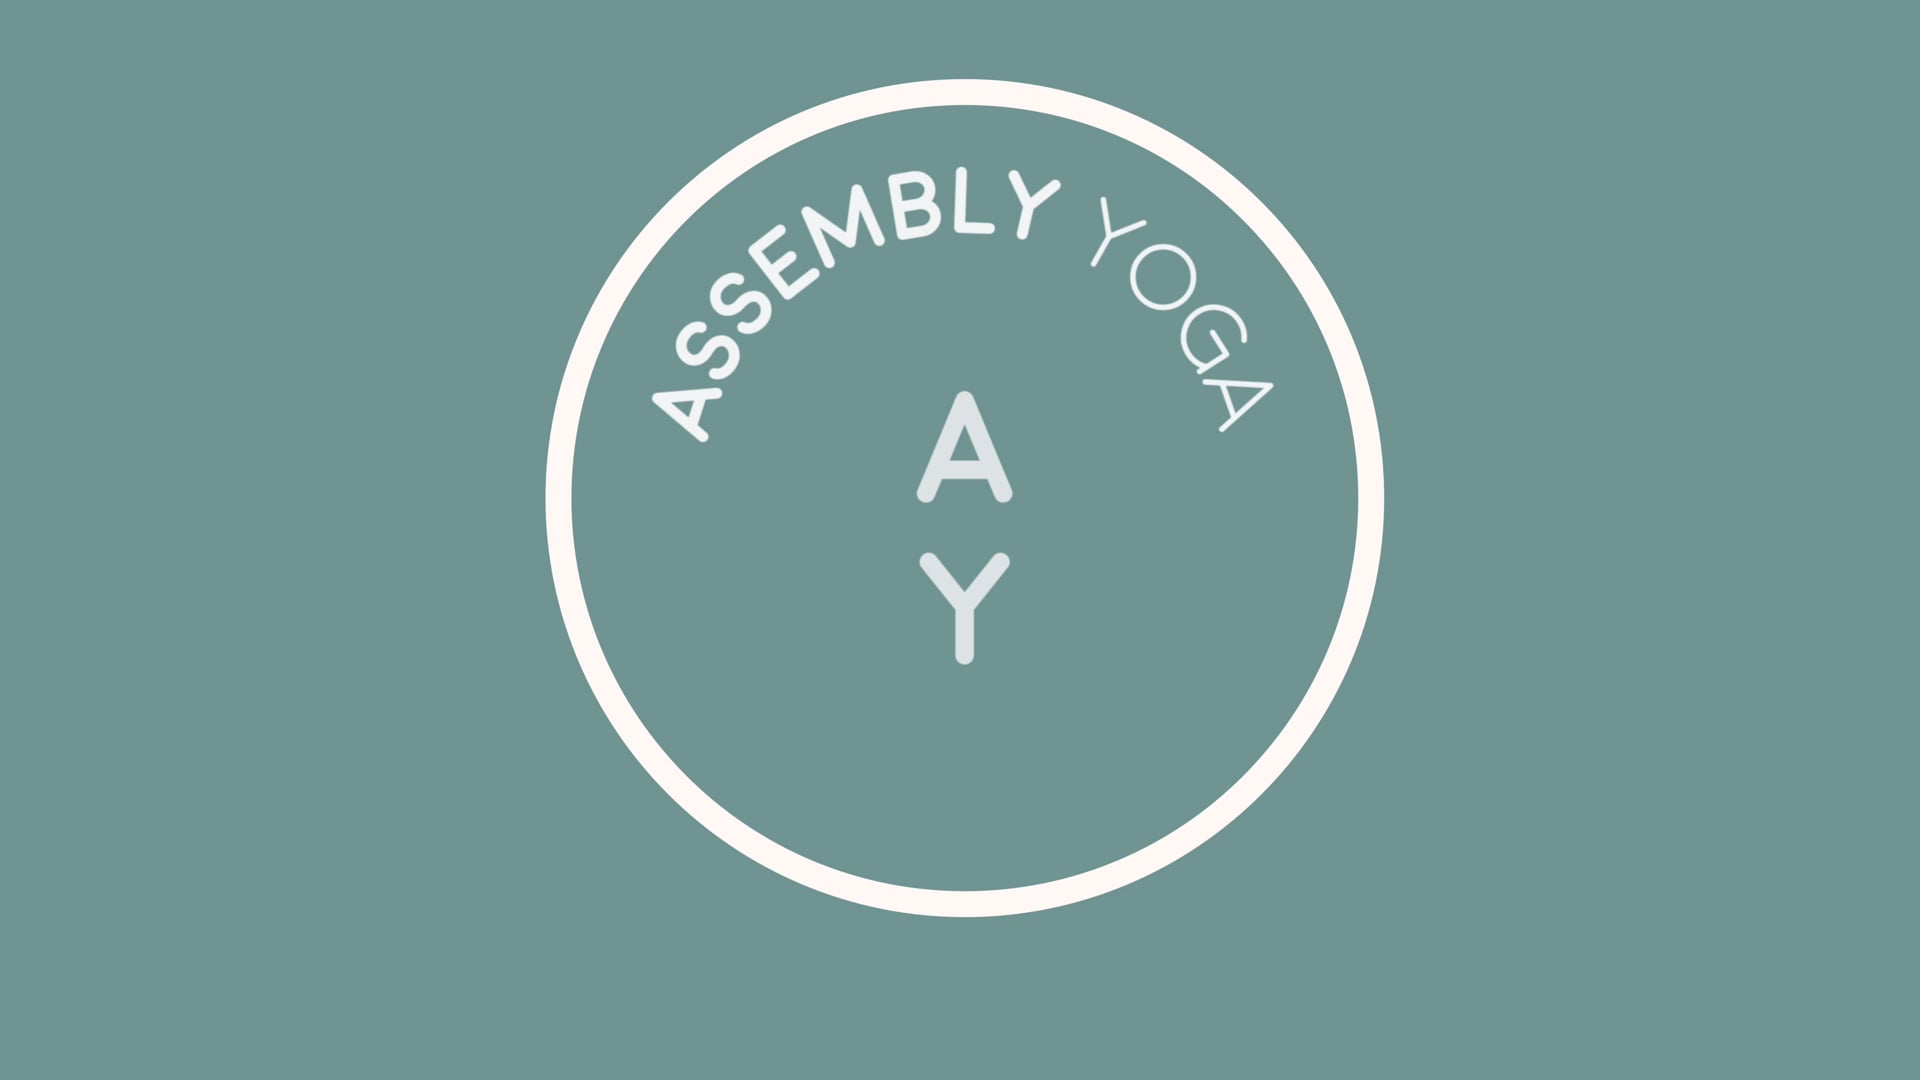 Introduction To Assembly Yoga